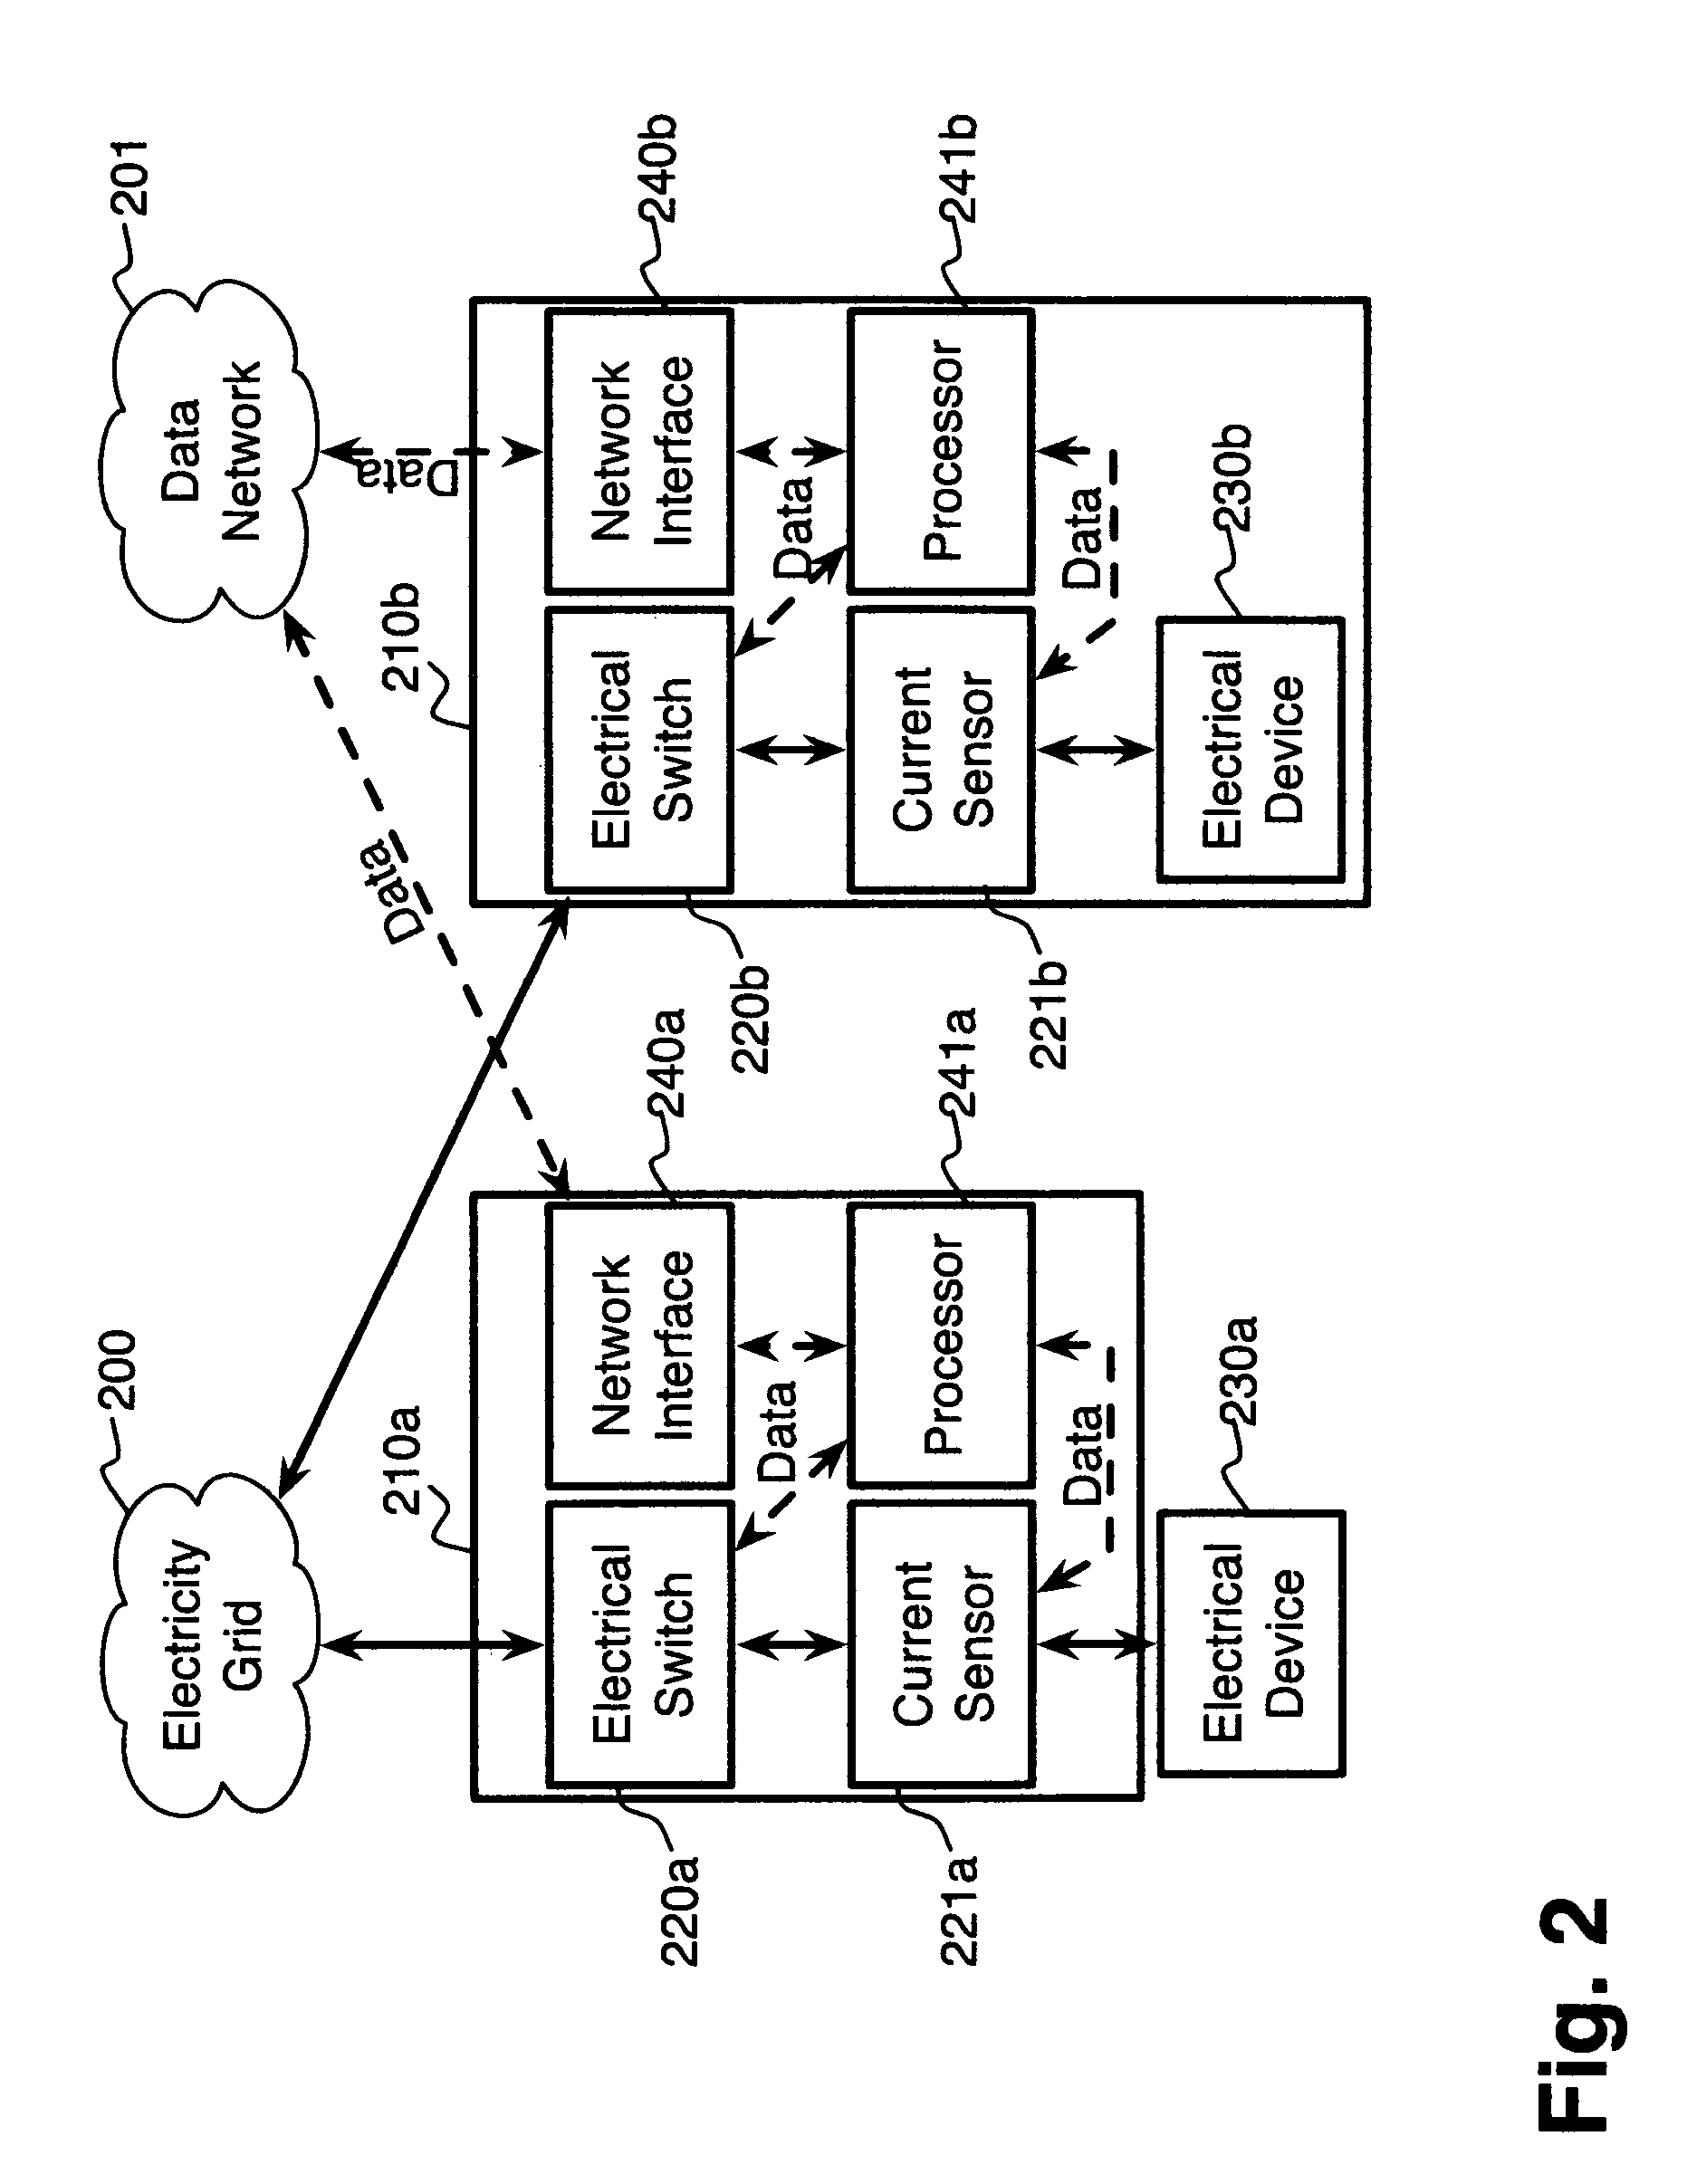 System and method for electric grid utilization and optimization